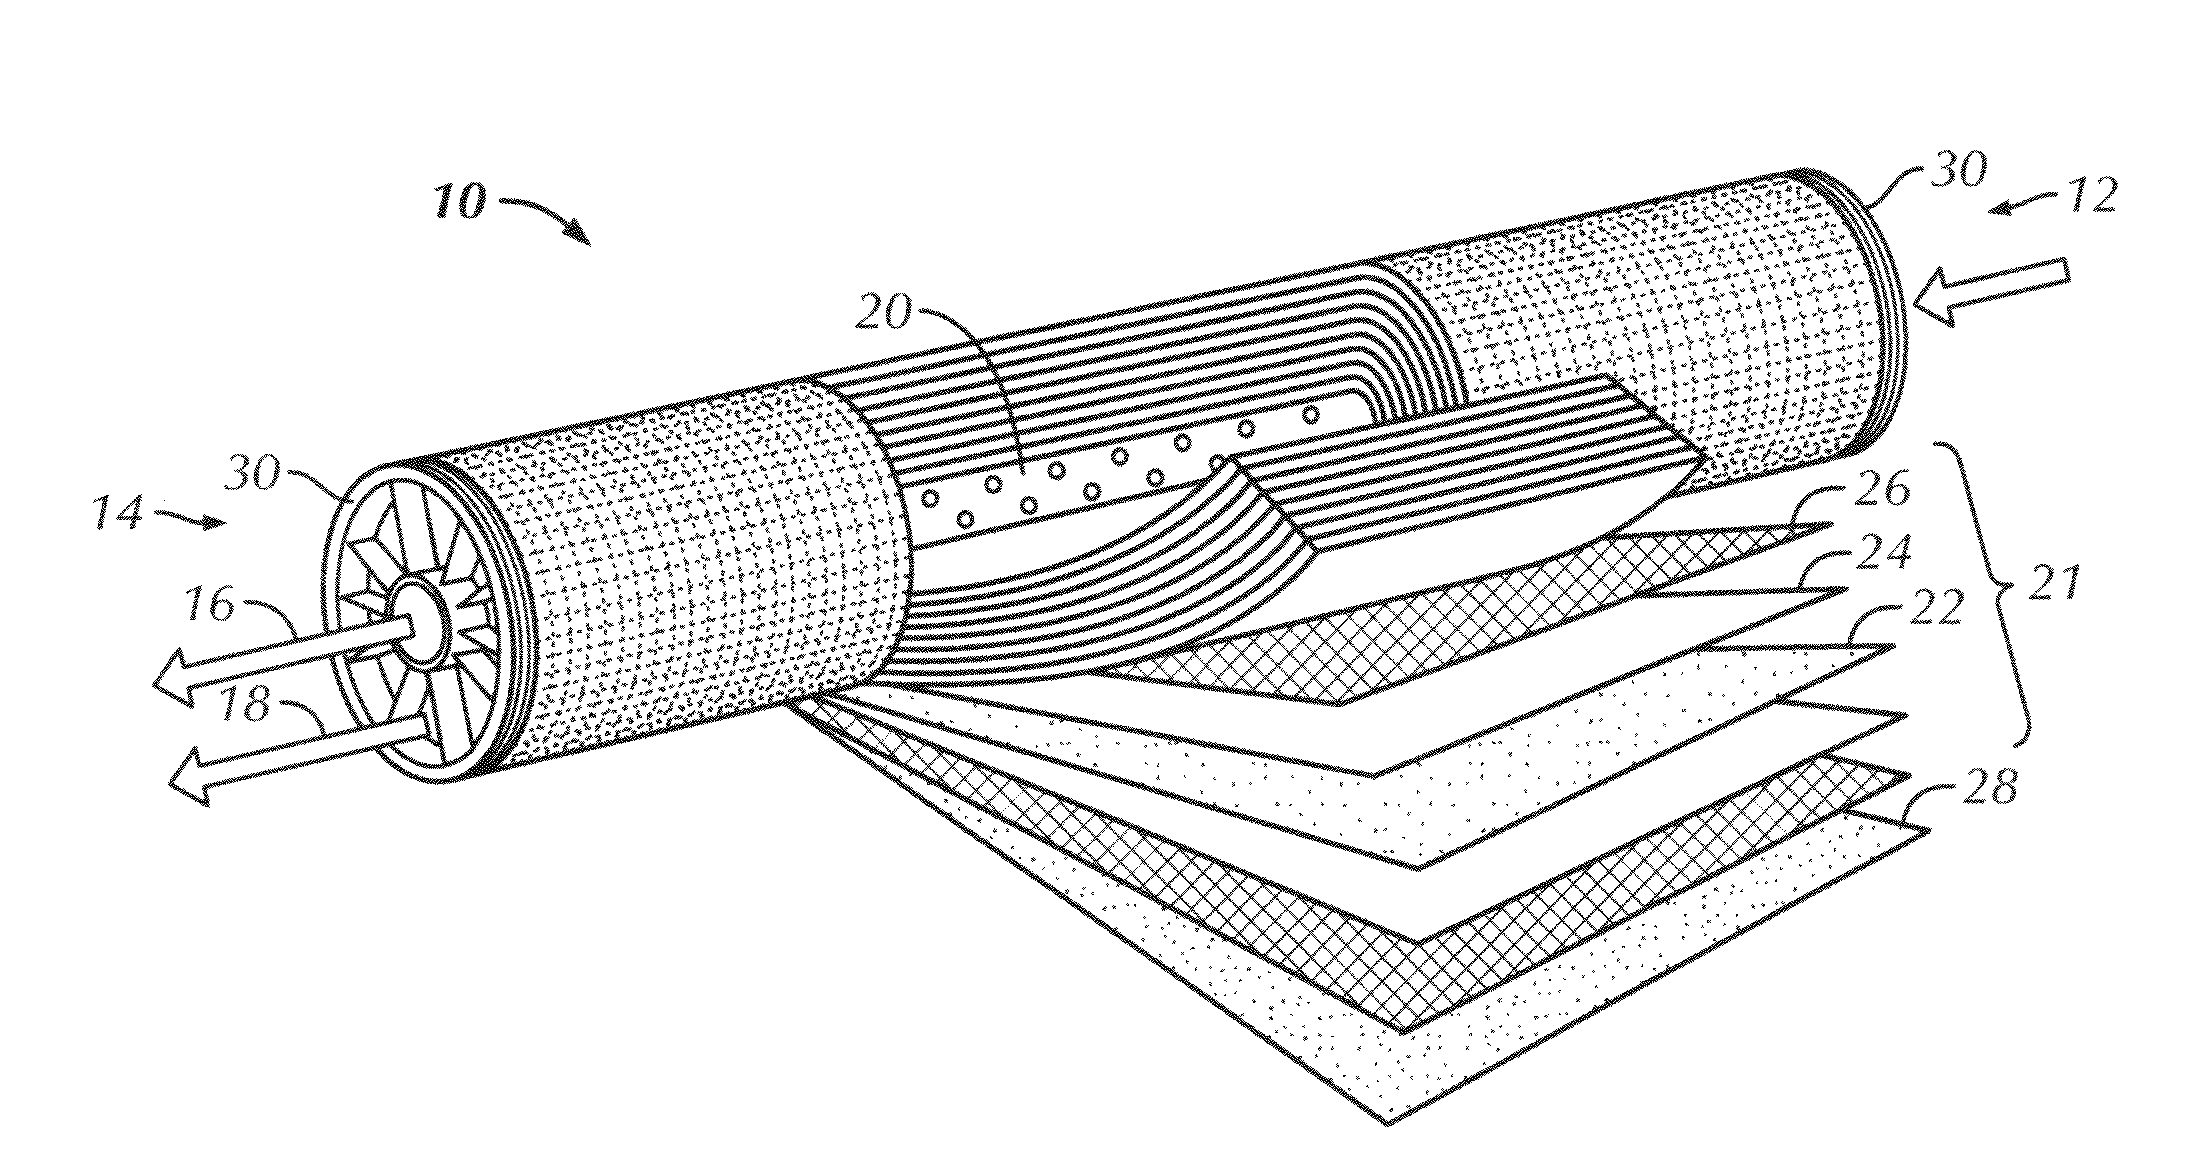 Cross-flow filtration apparatus with biocidal feed spacer